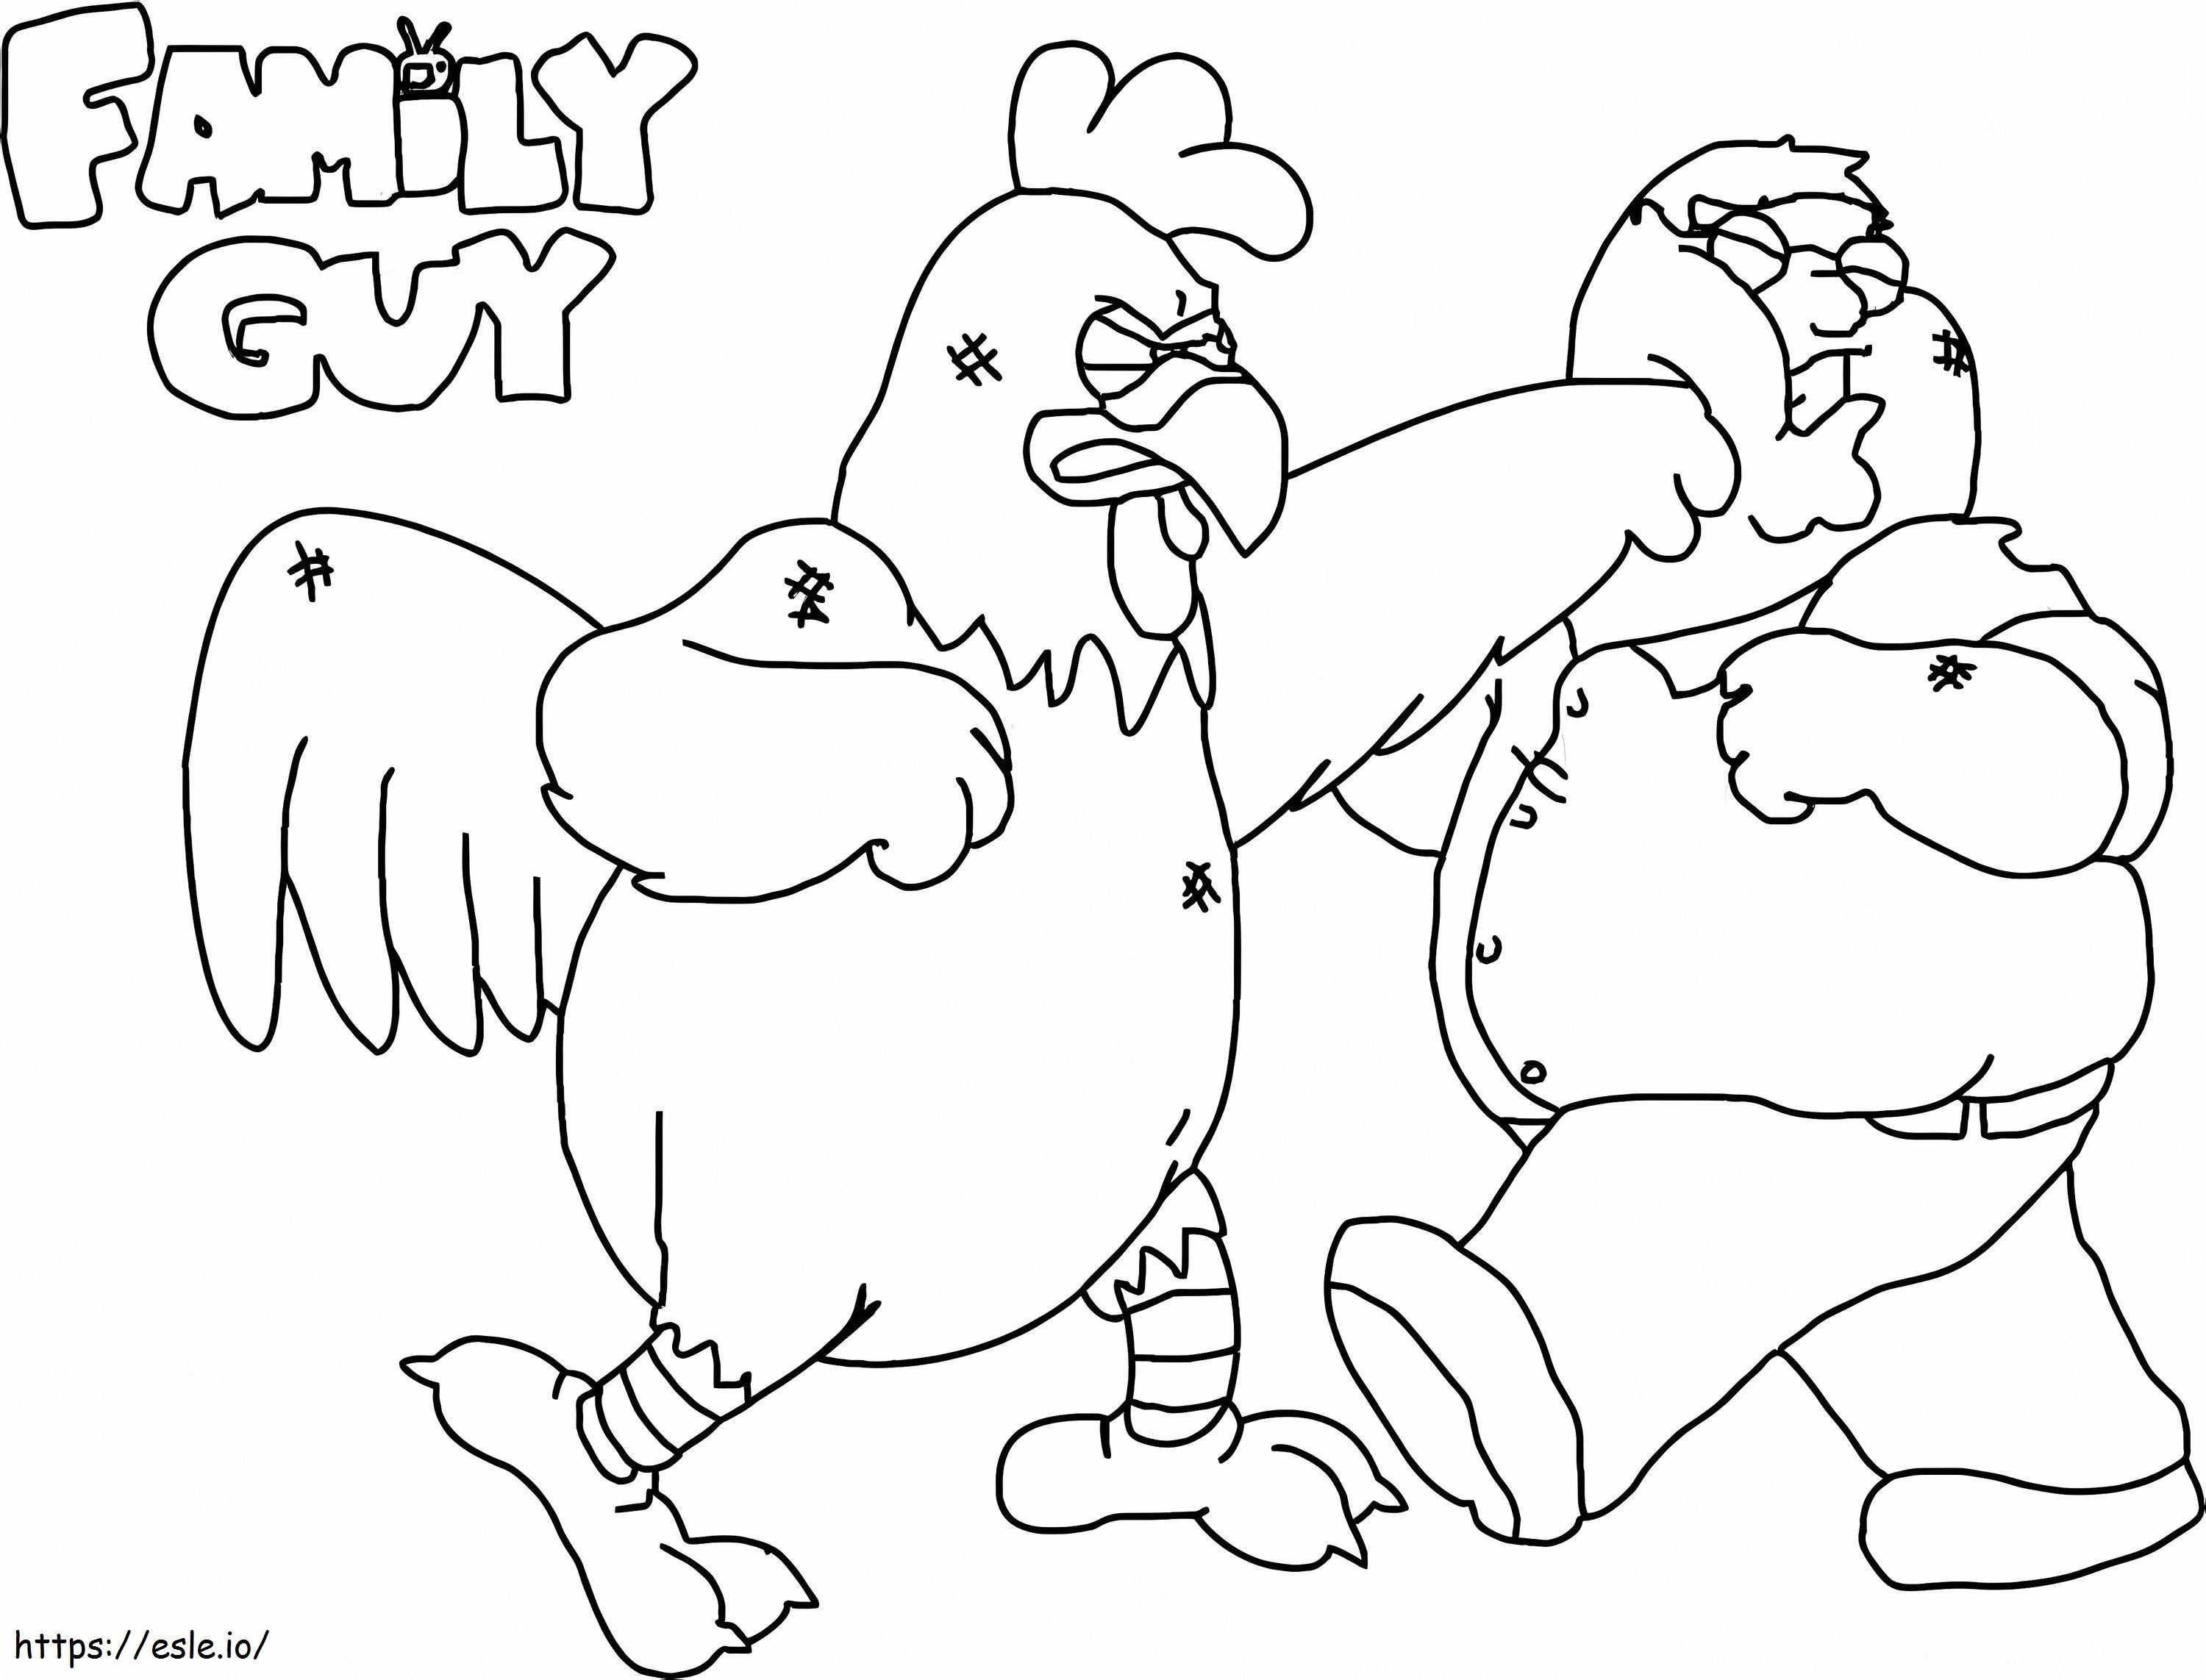 Peter And The Chicken Fighting coloring page